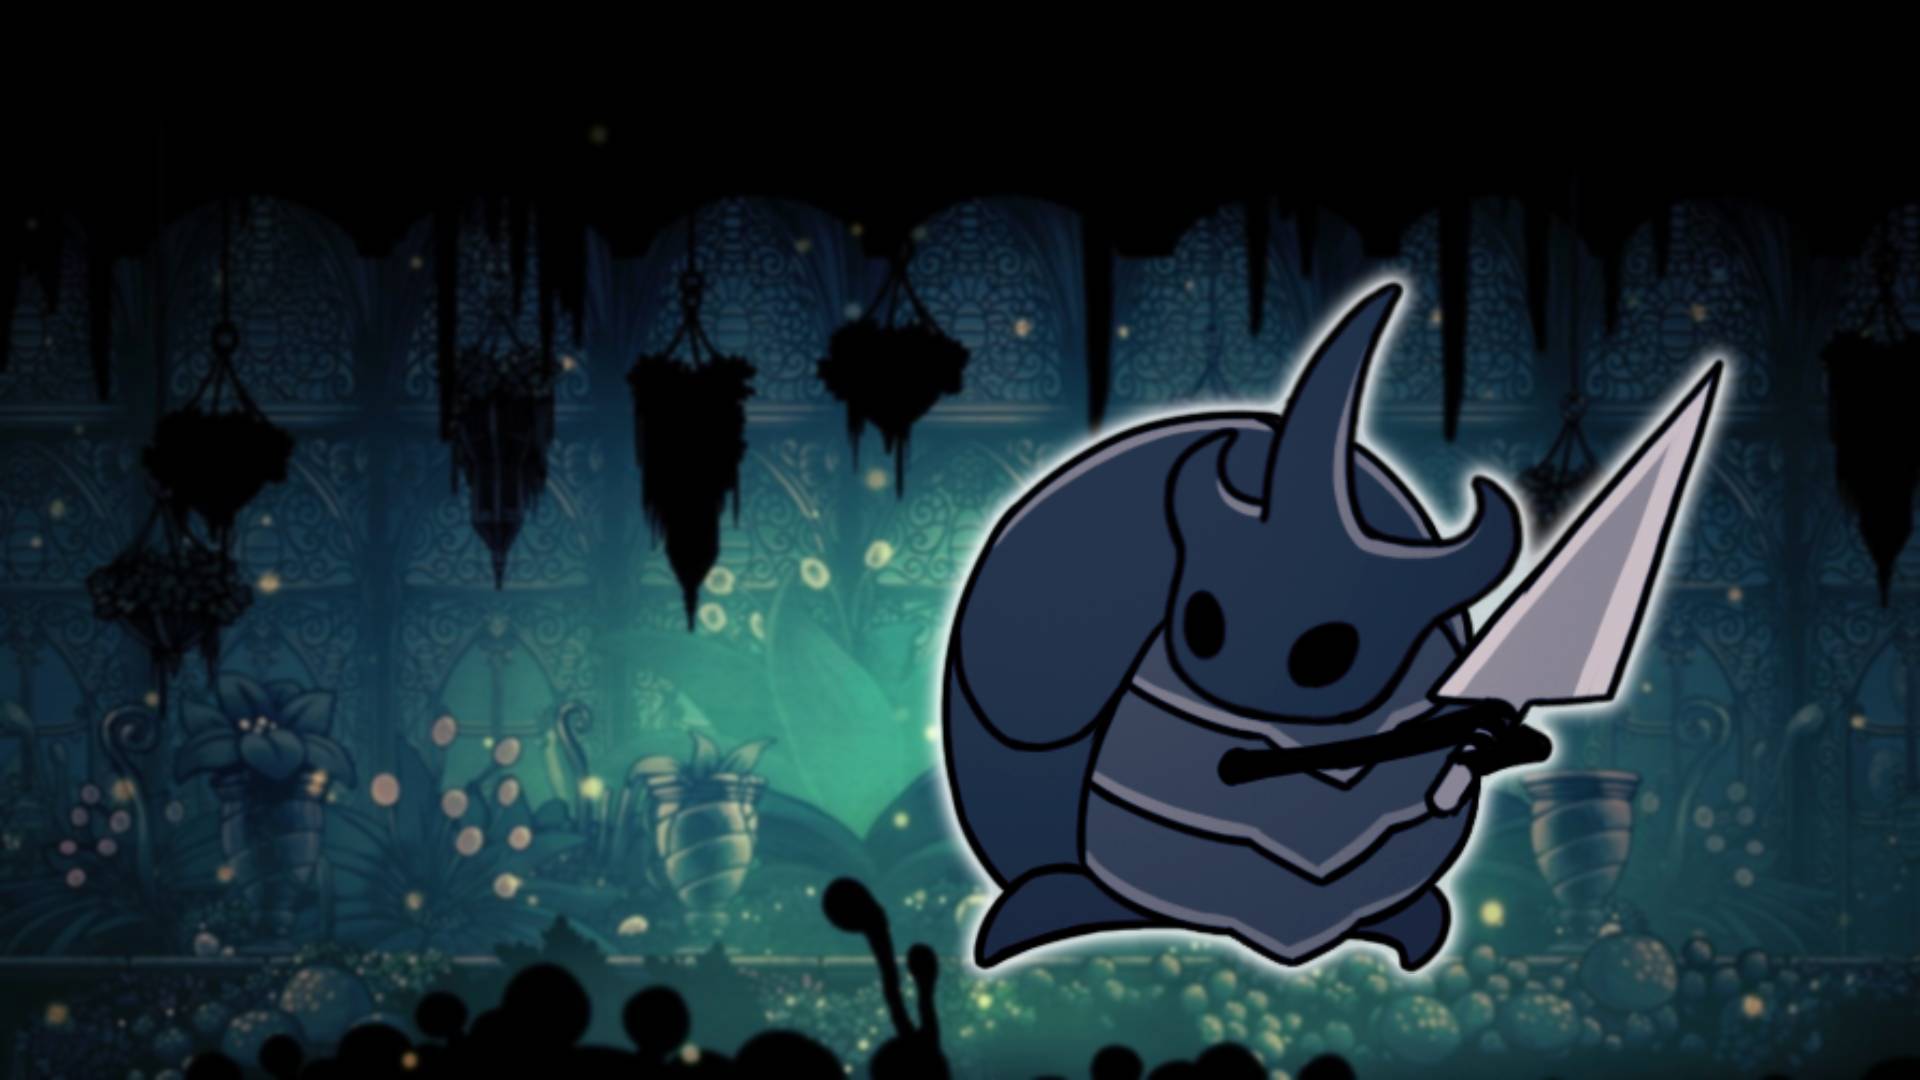 Watcher Knights - the Hollow Knight boss, is visible against a mossy green background area from Hollow Knight